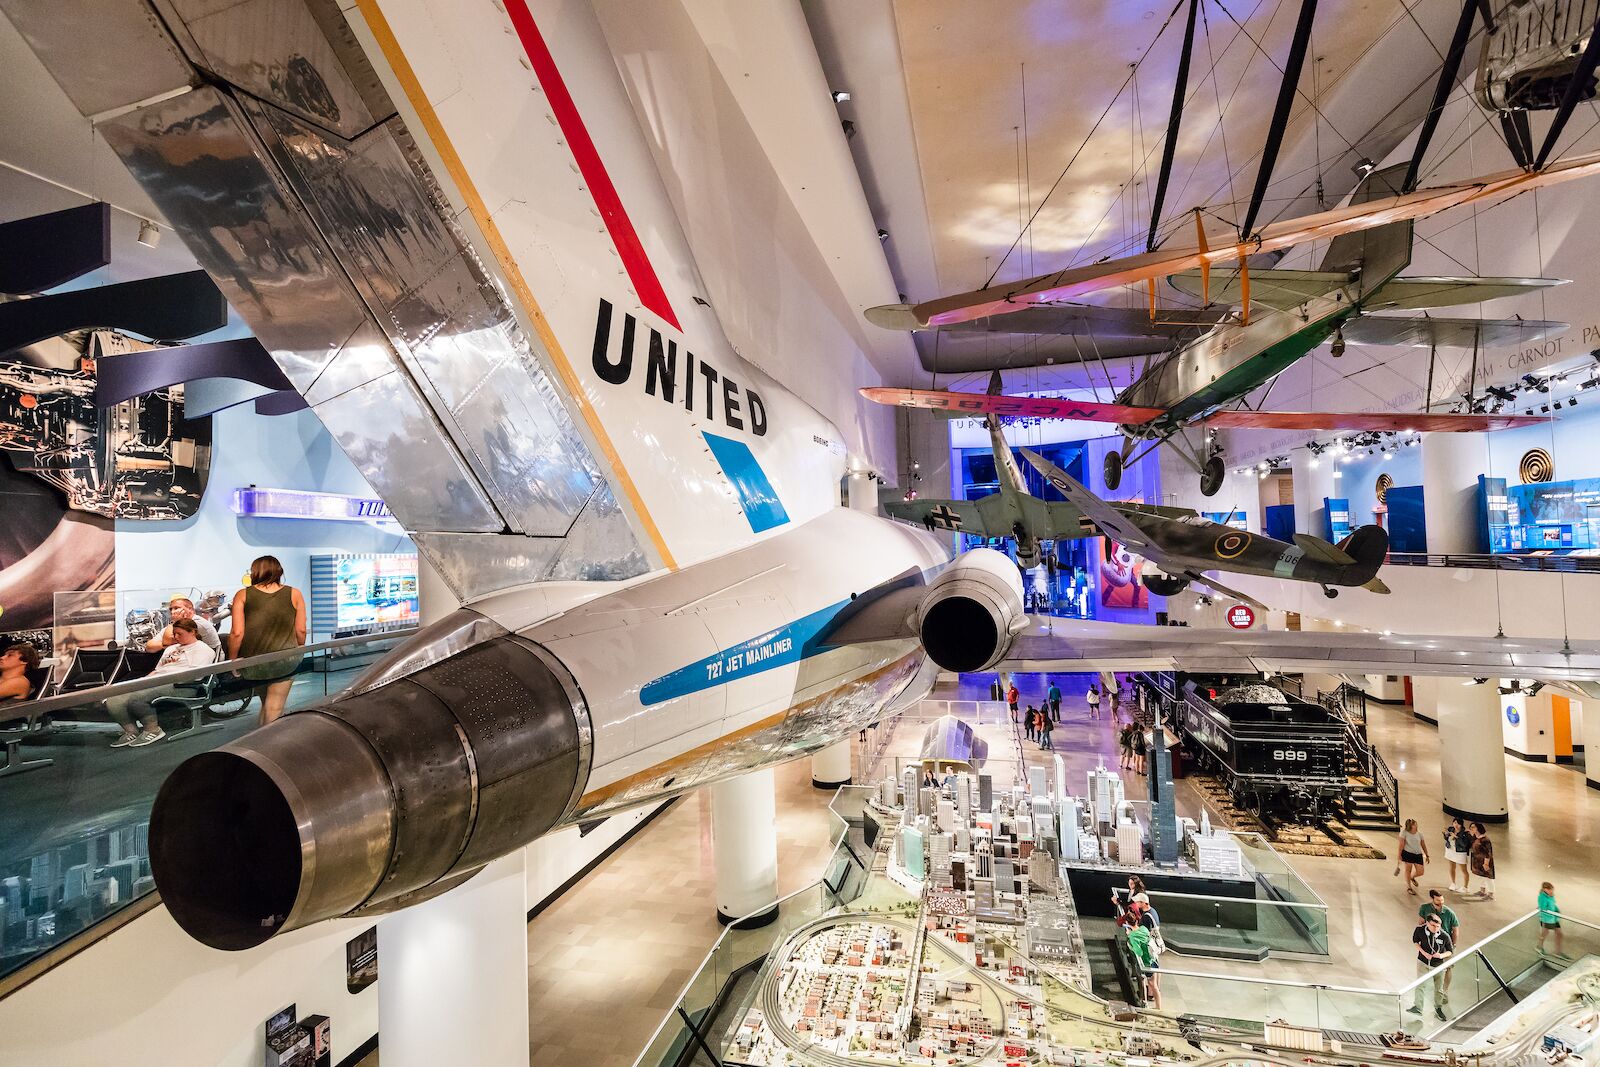 Plane exhibits at the The Museum of Science and Industry in Chicago. The Museum of Science and Industry is one of the best museums in Chicago